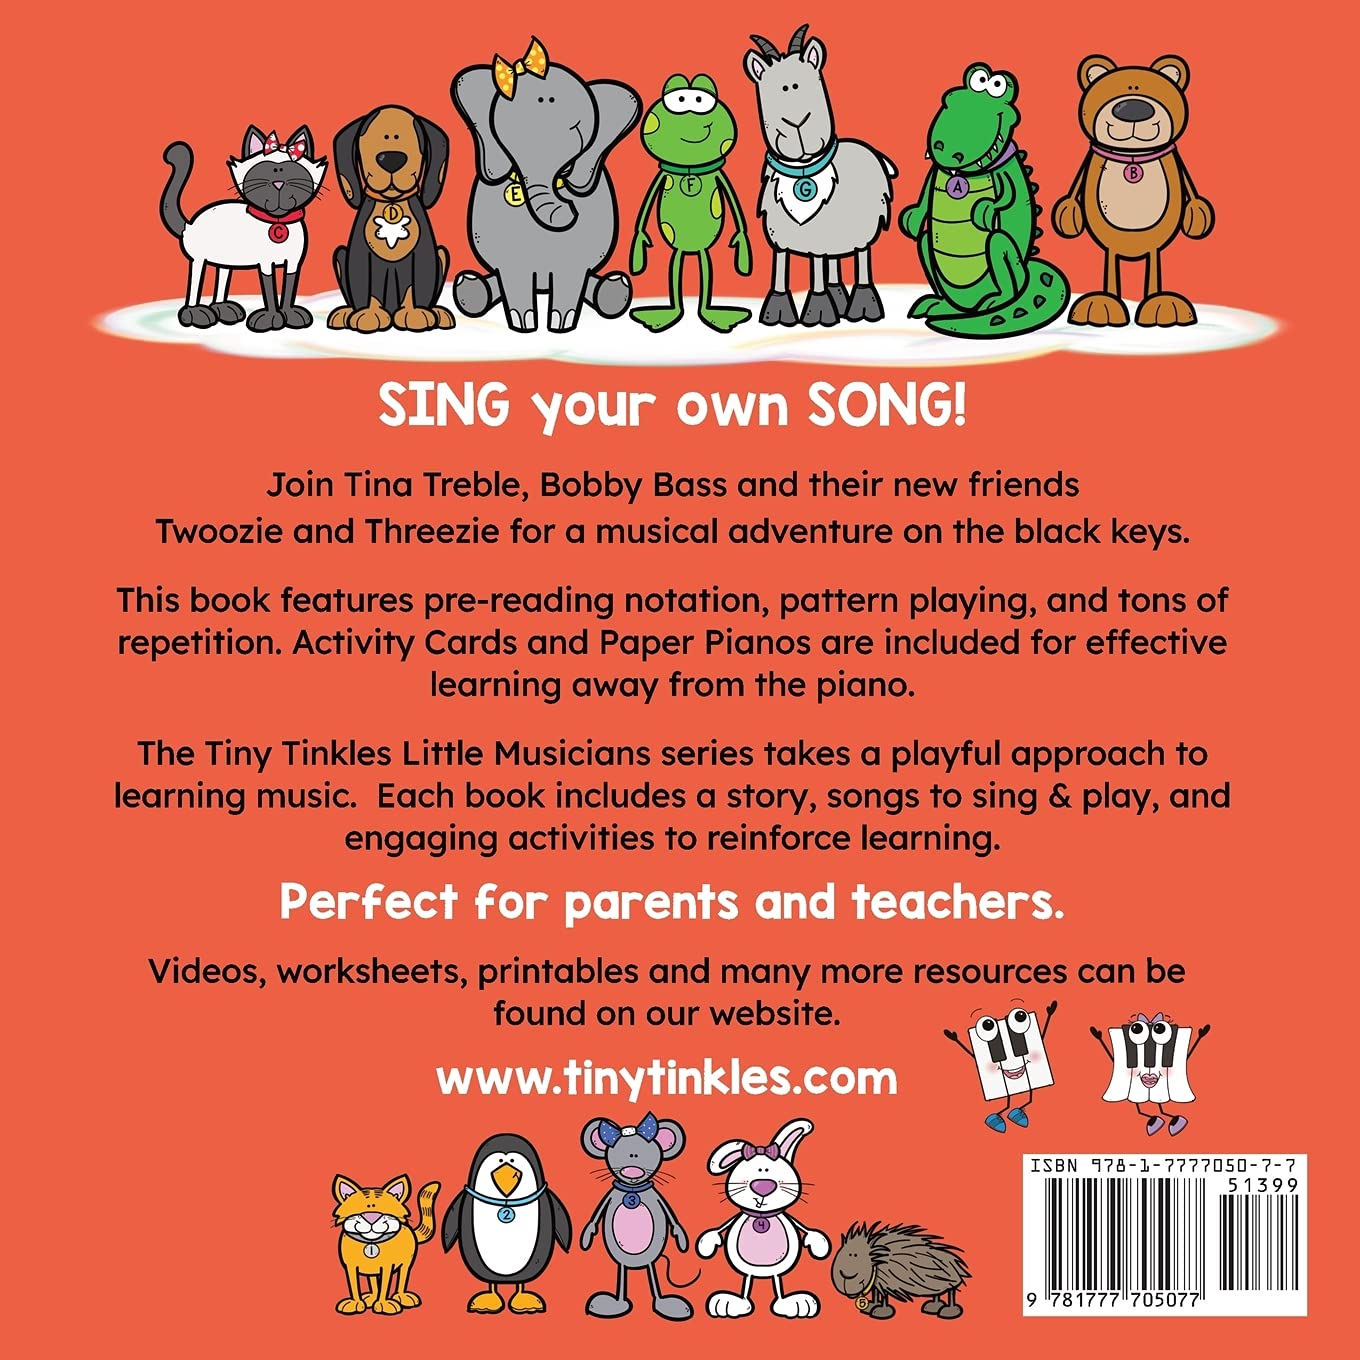 Little Performers Book 1 Patterns on Black Keys (Tiny Tinkles Little Musicians Series)